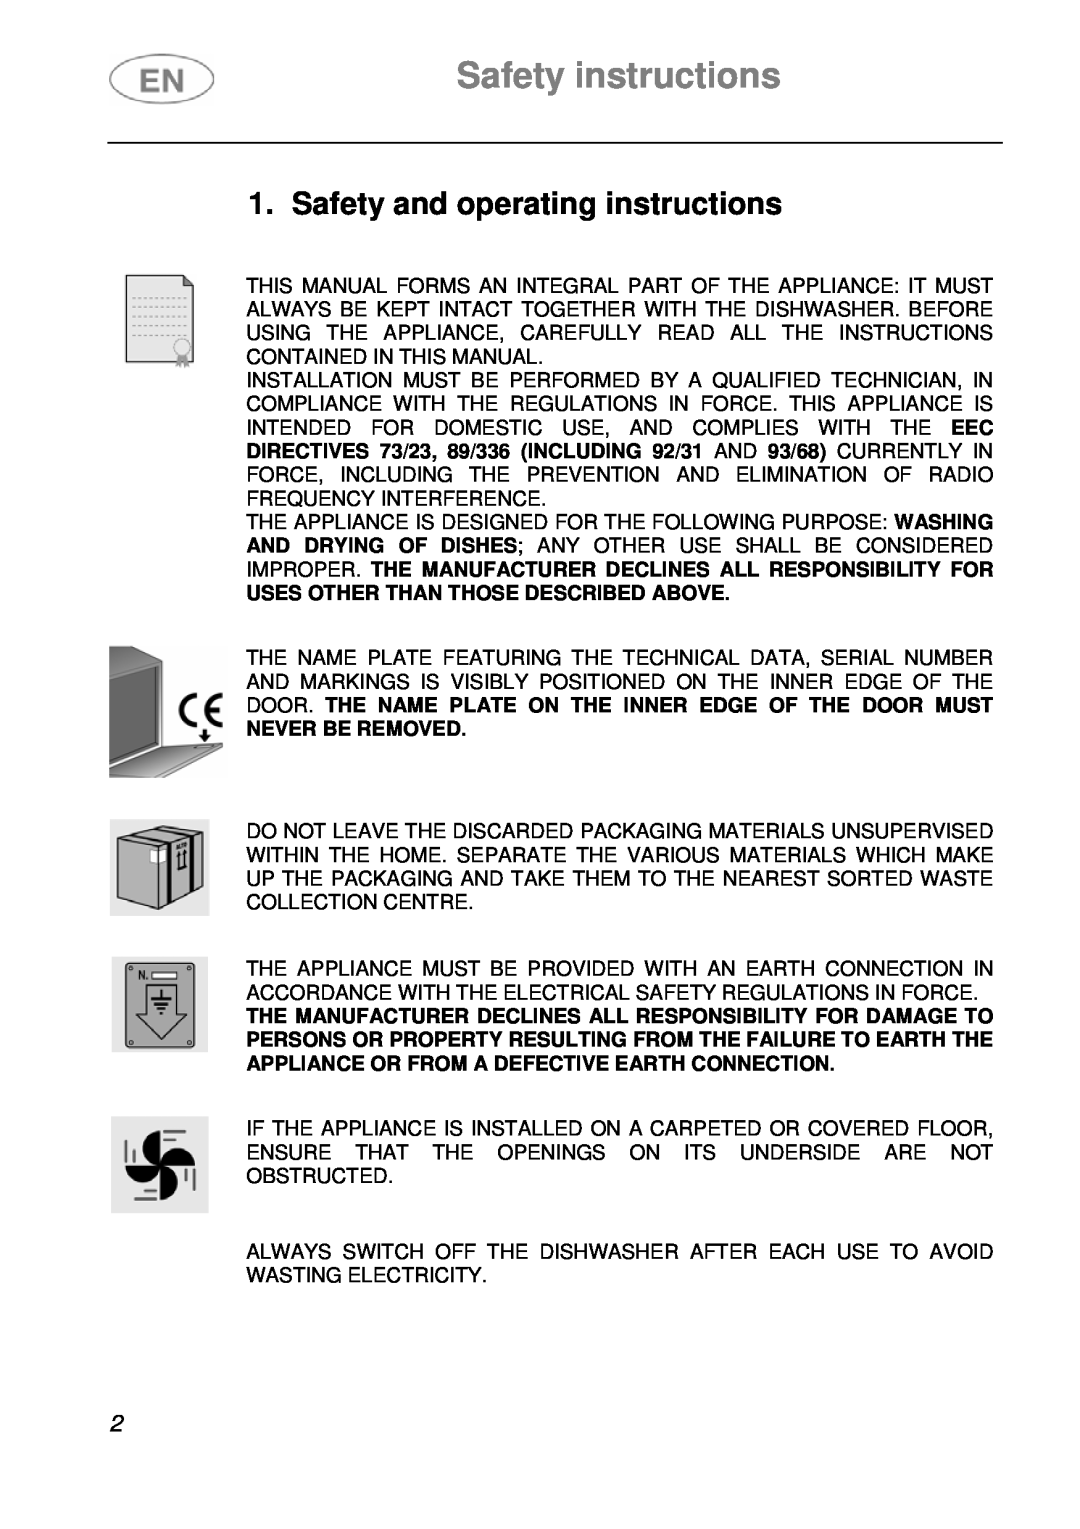 Smeg DI612A1 Safety instructions, Safety and operating instructions, Uses Other Than Those Described Above 